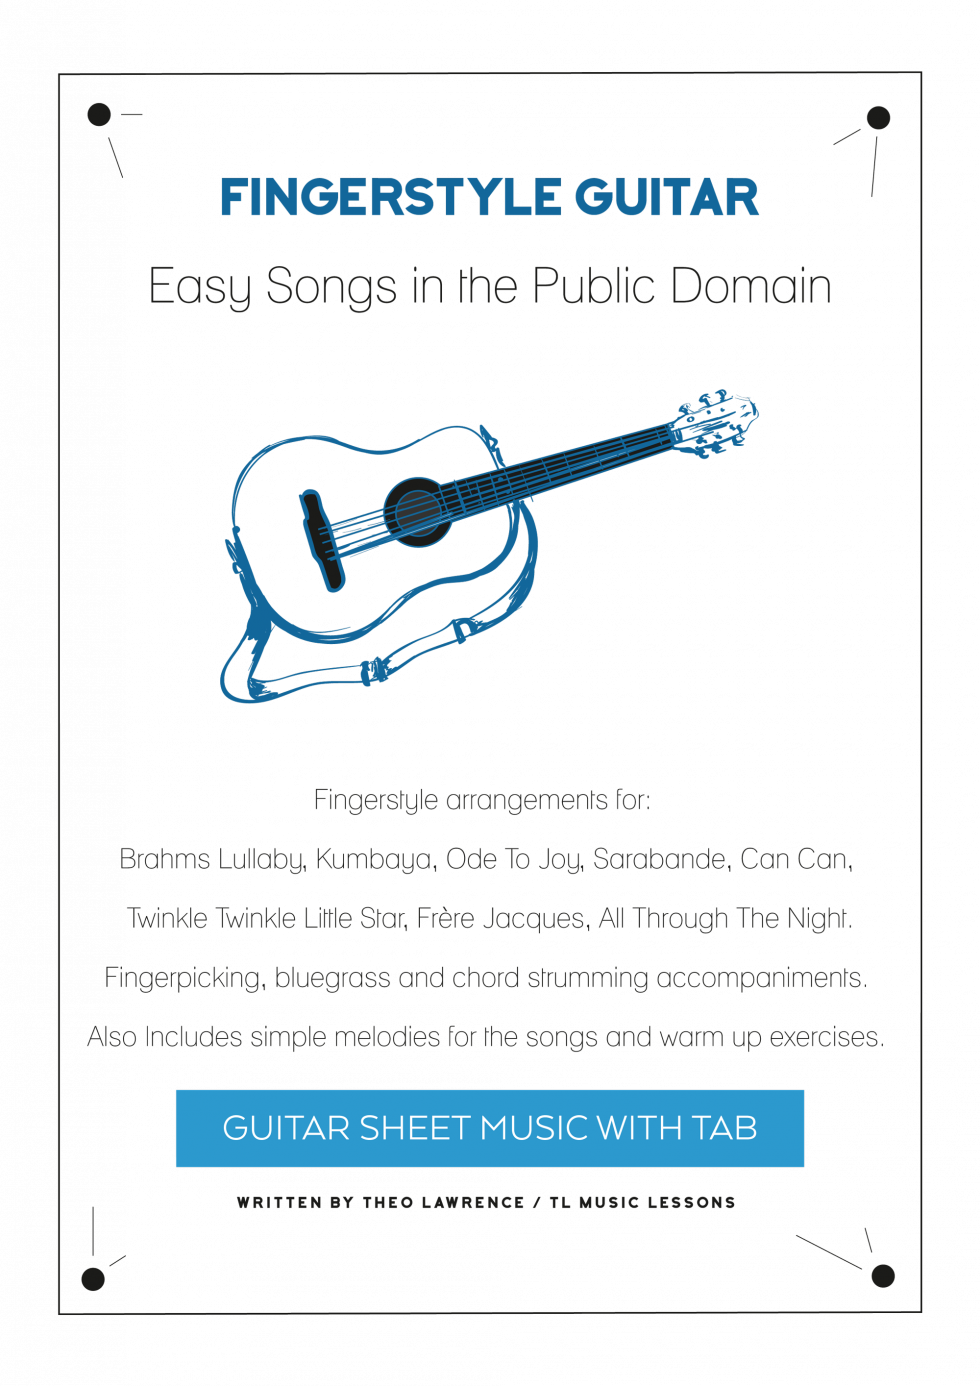 fingerstyle-guitar-easy-songs-in-the-public-domain-learn-guitar-for